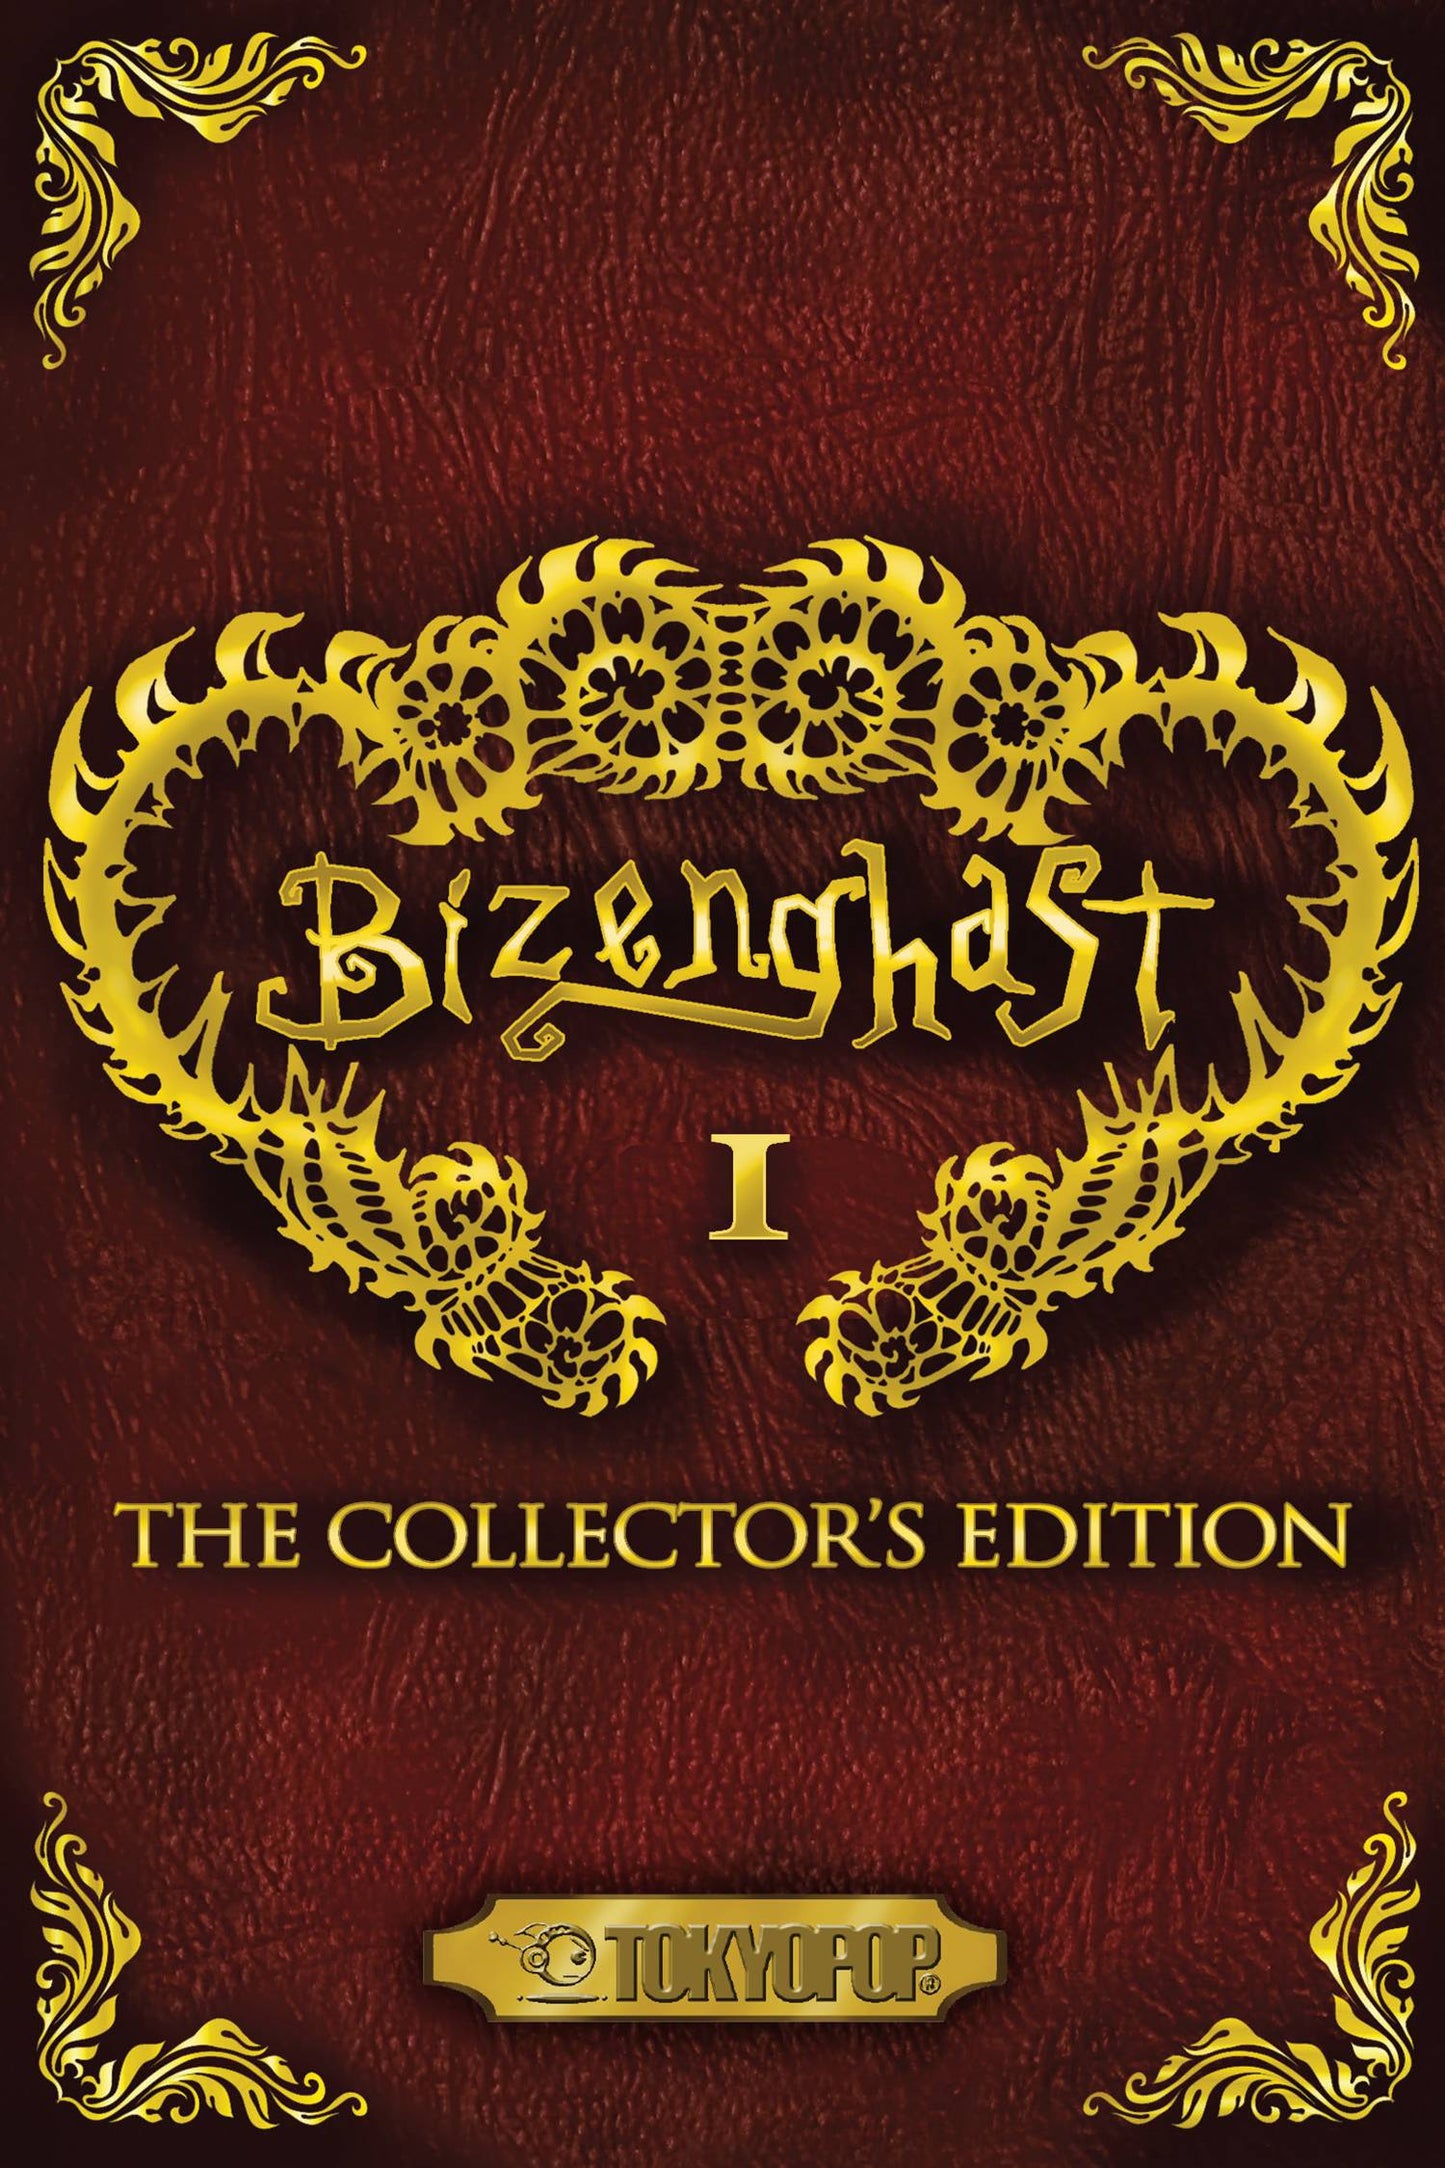 Bizenghast 3-in-1 Vol. 01 Special Collector Edition